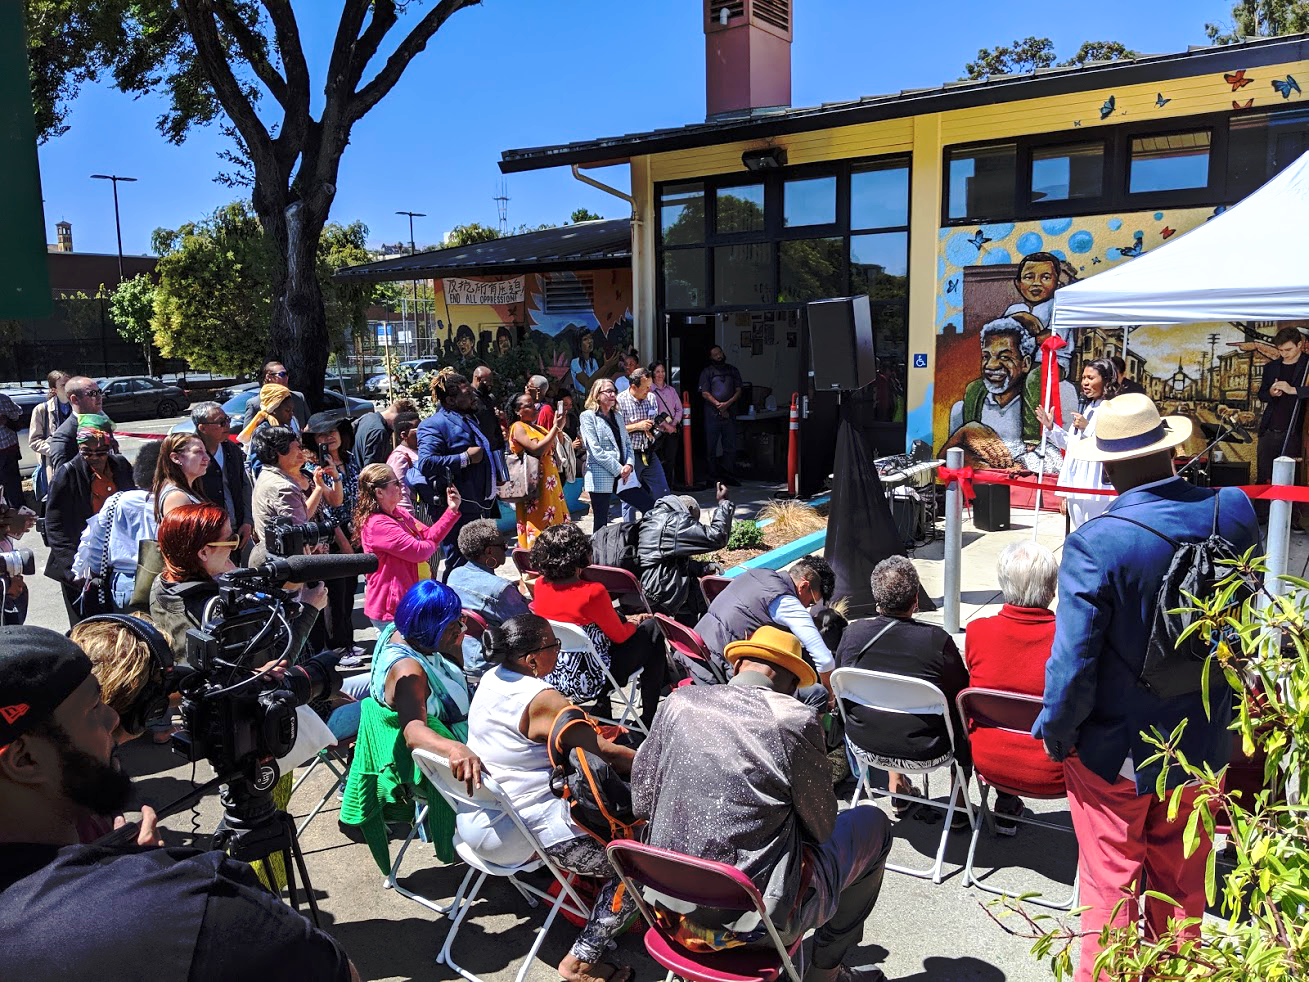 Mayor-London-Breed-unveils-‘Spirit-of-Fillmore’-mural-crowd-Buchanan-Mall-080319-by-Darcy-Brown-Martin, Community-created ‘Spirit of Fillmore’ mural unveiled by SF Mayor London Breed, Local News & Views 